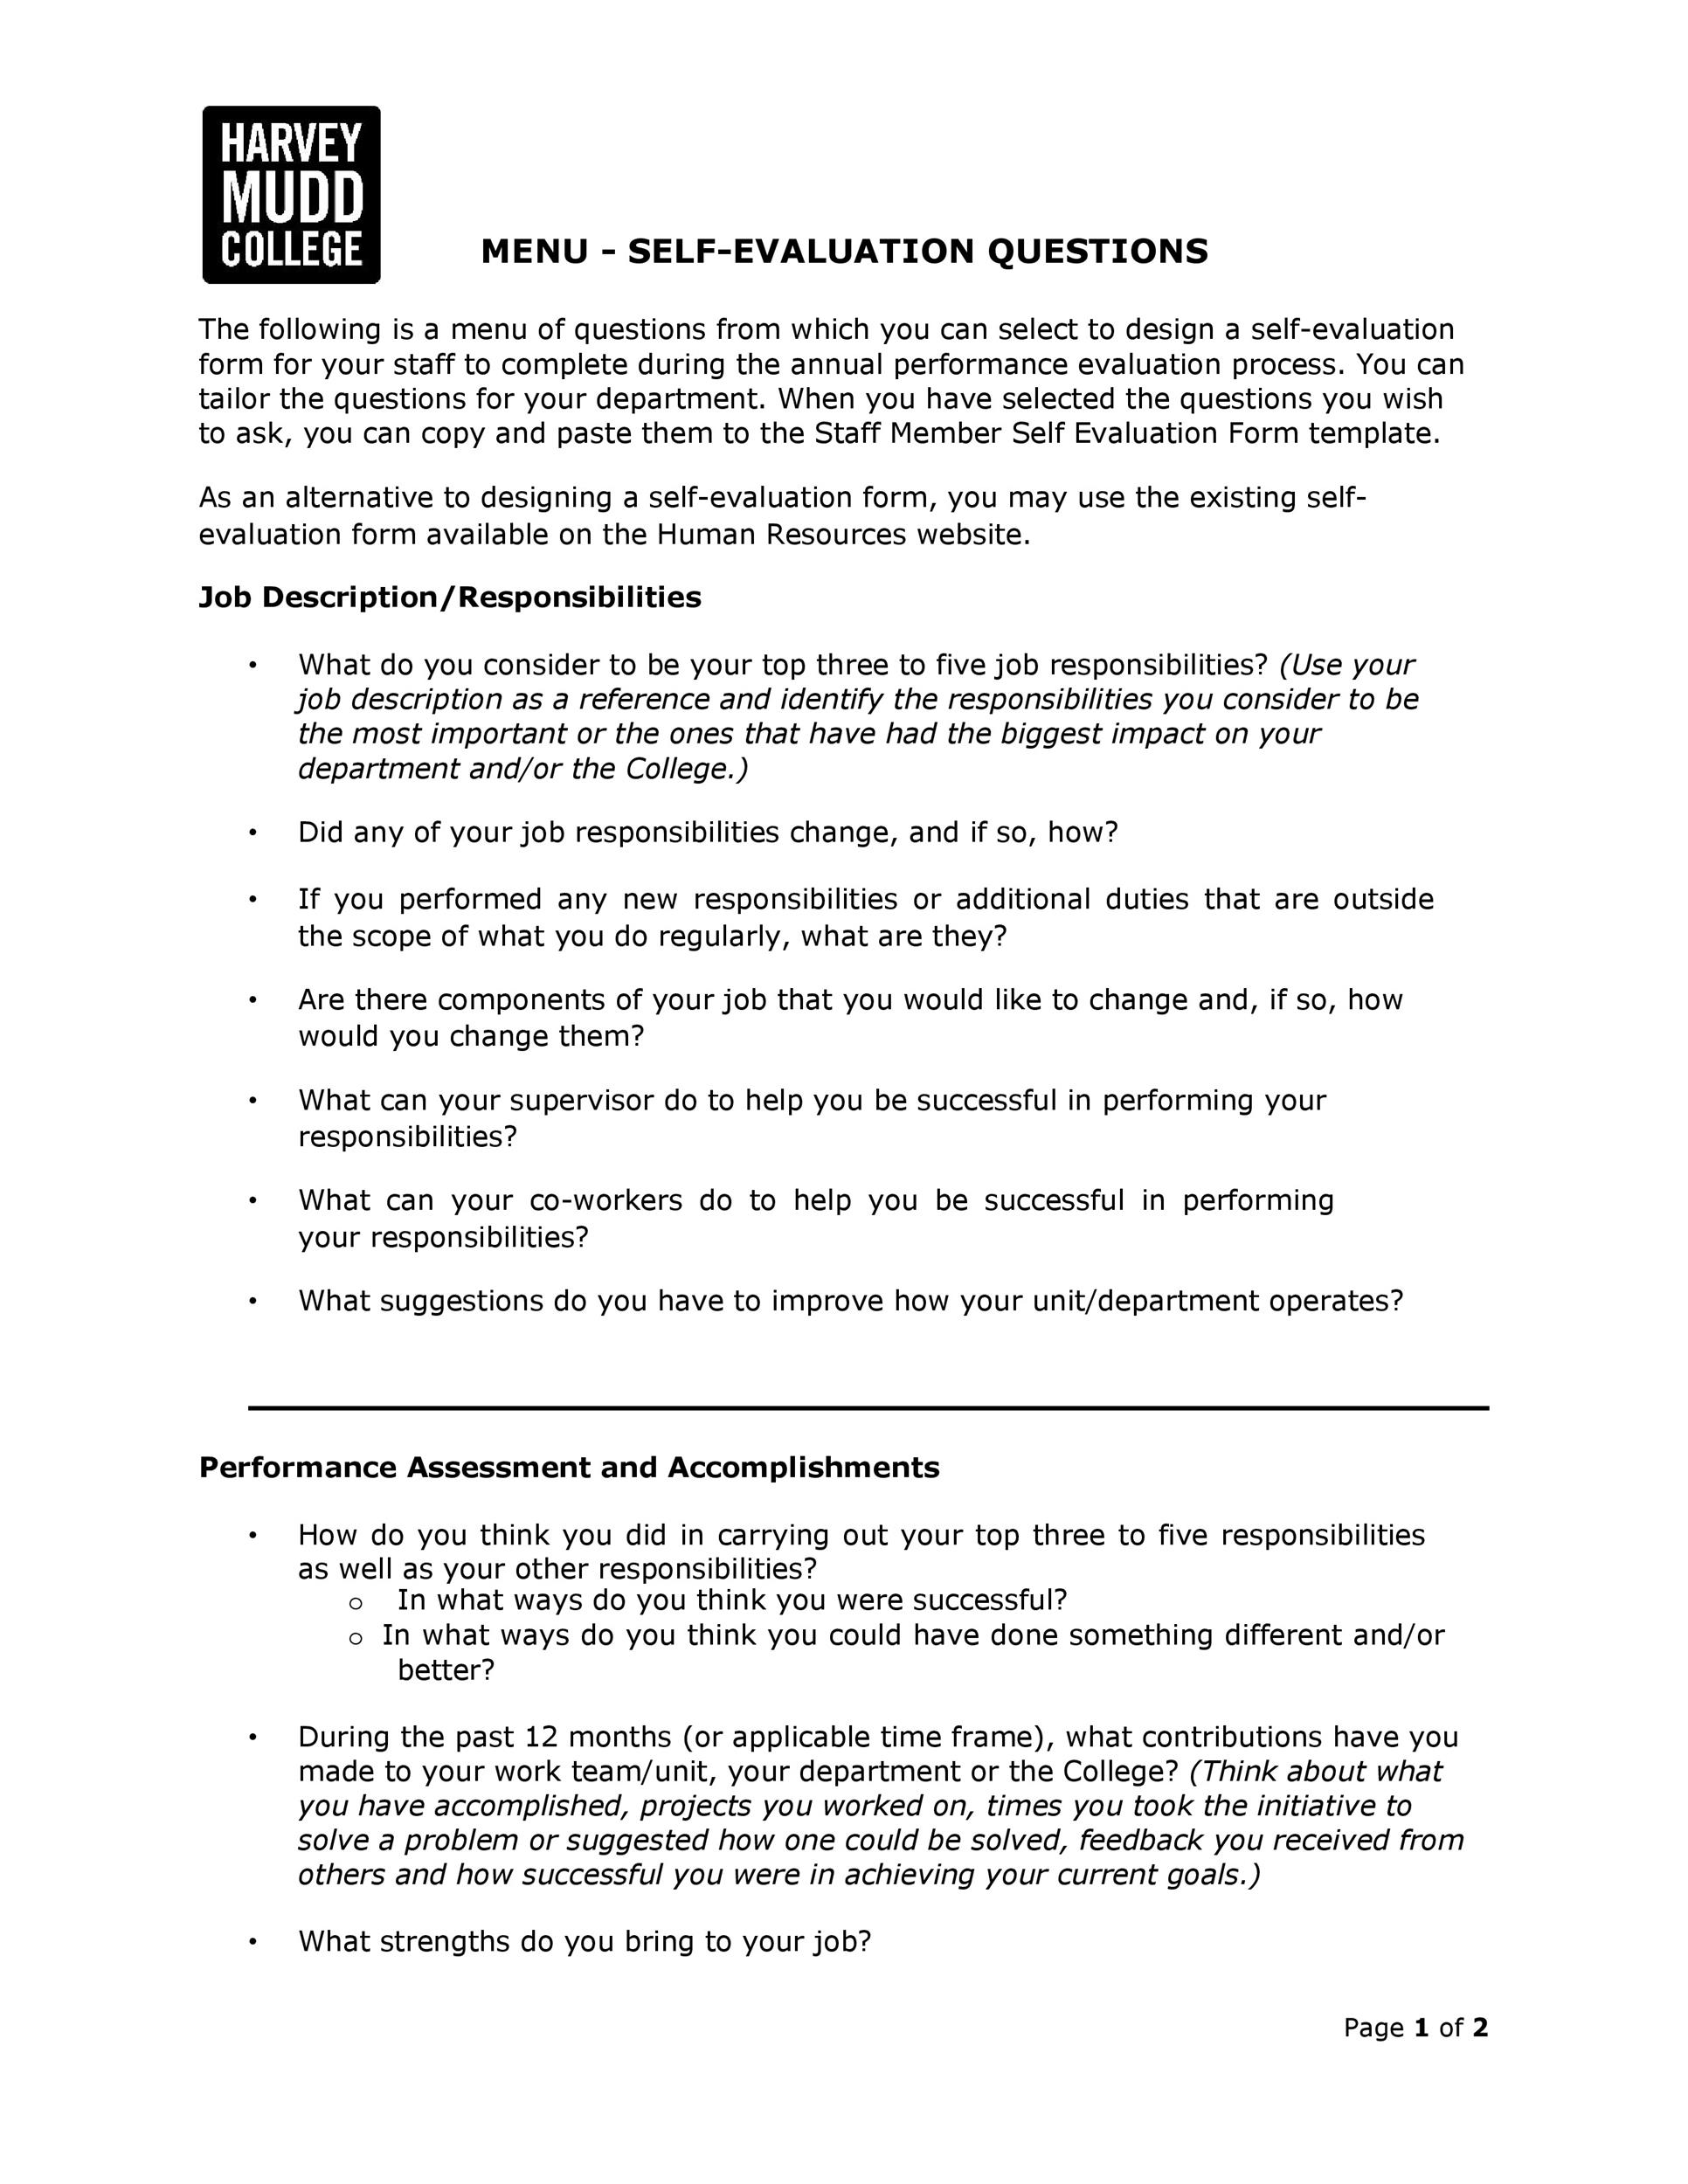 14+ Self Evaluation Examples, Forms & Questions ᐅ TemplateLab